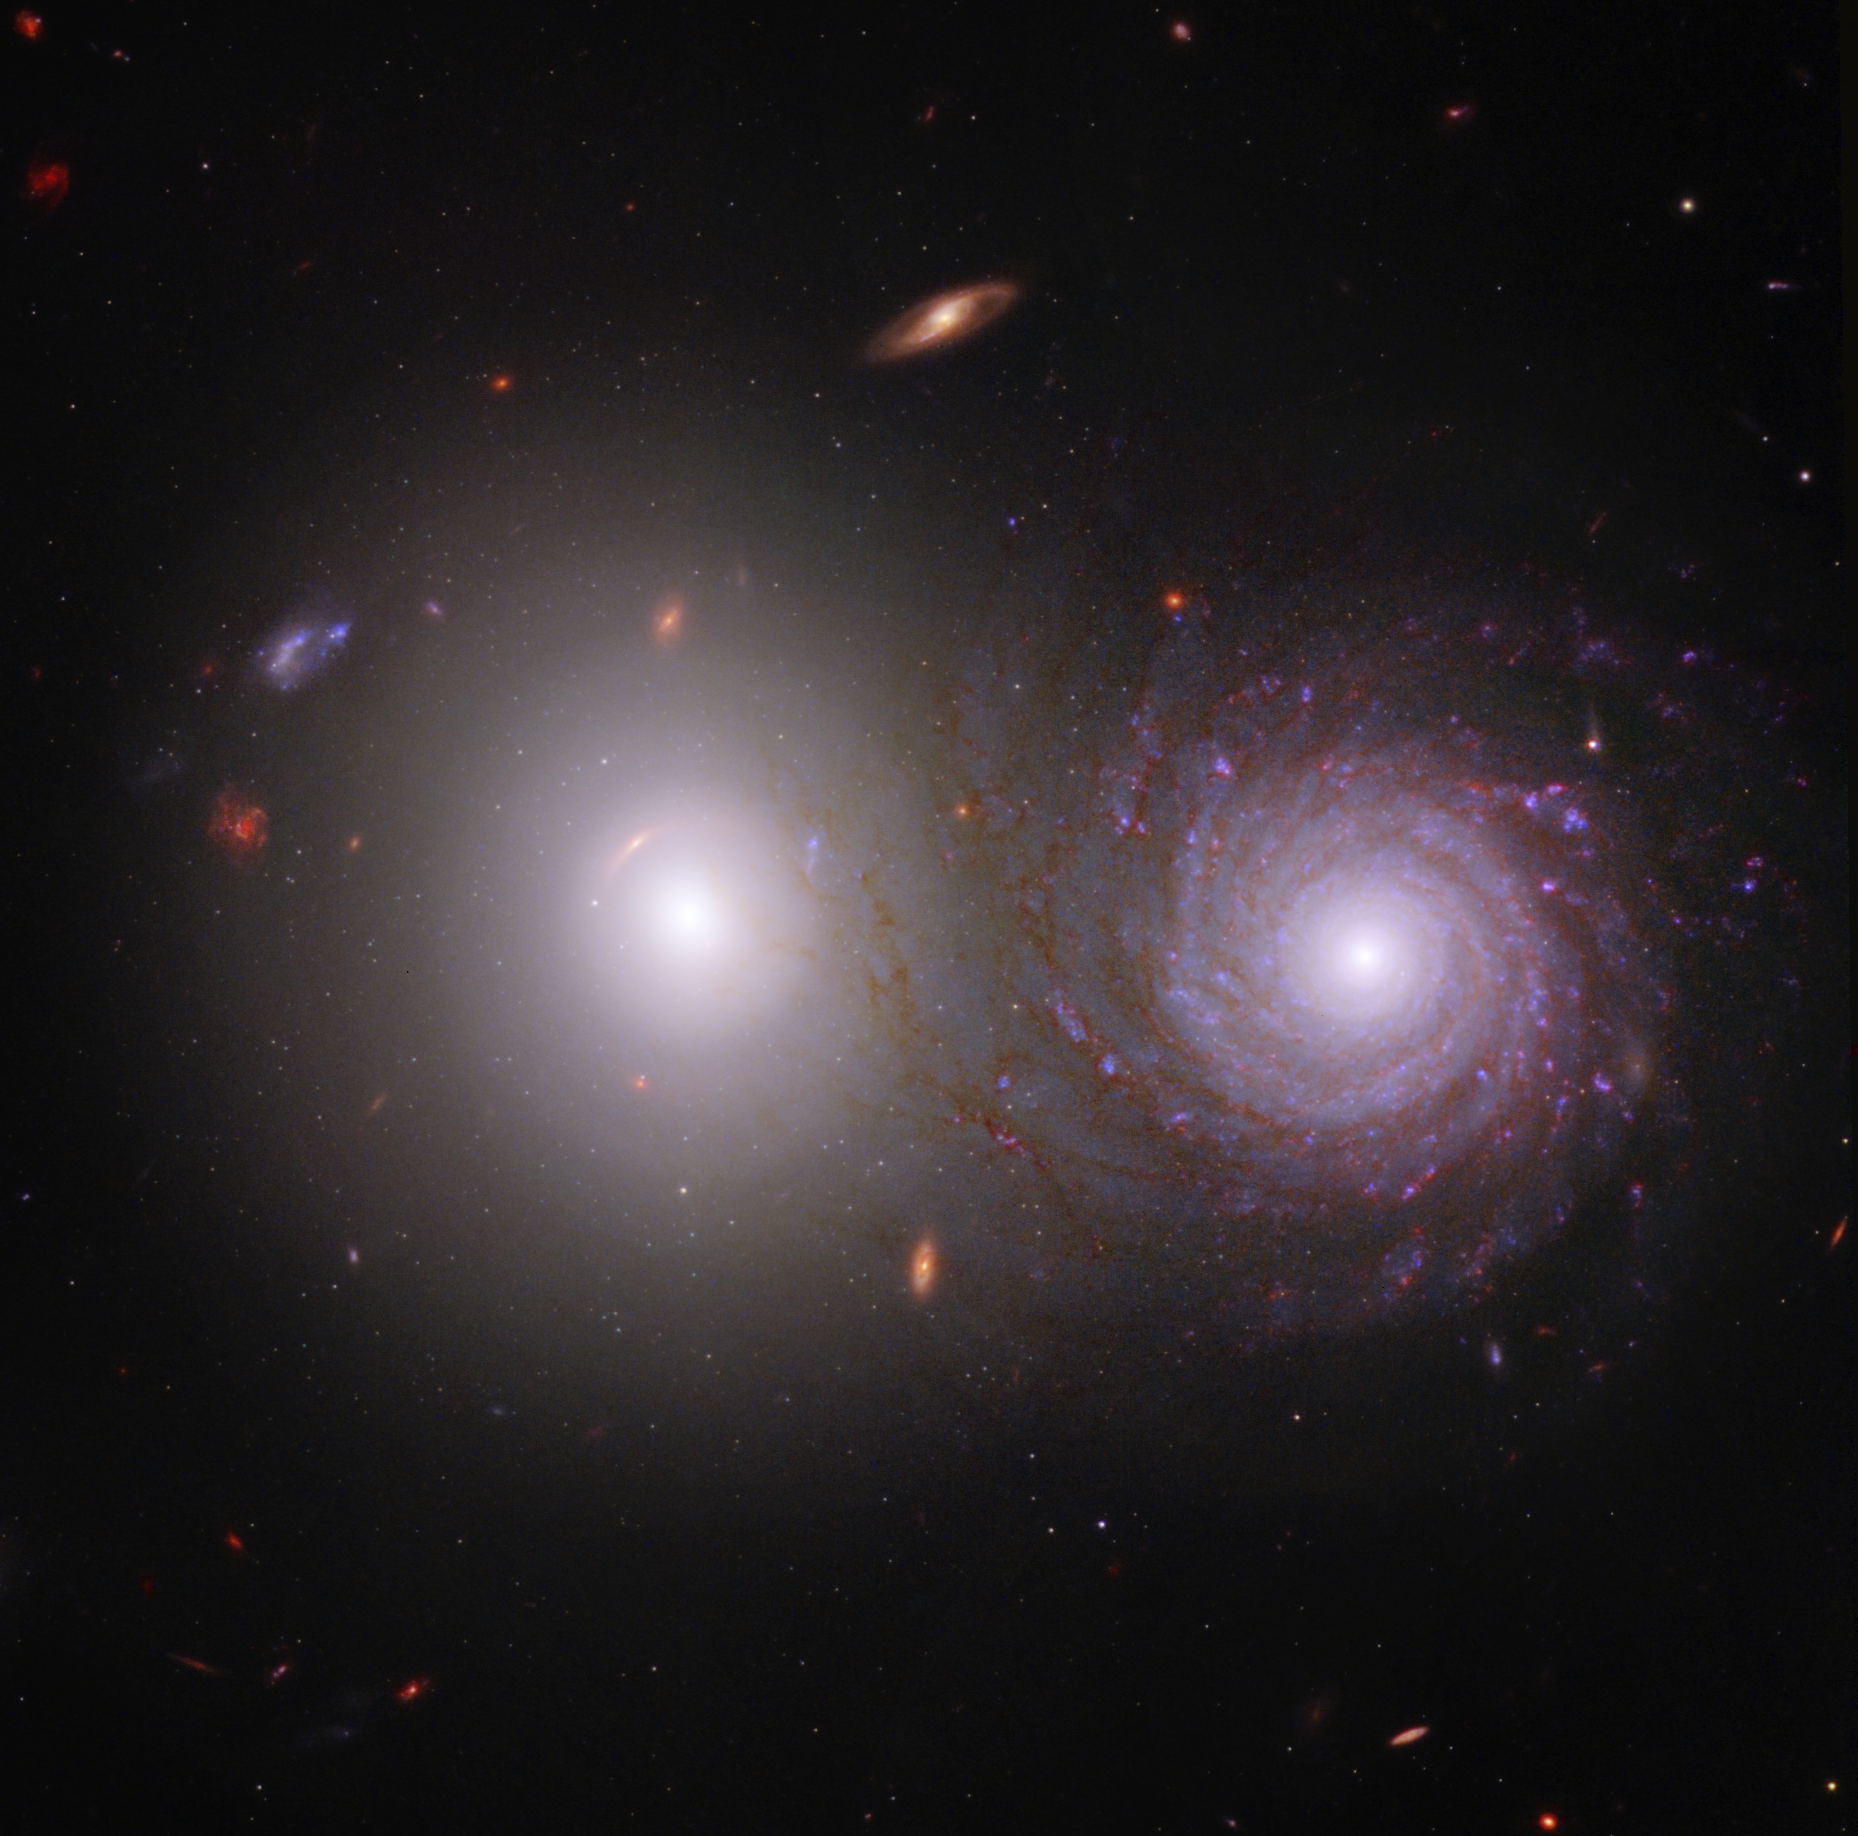 A pair of galaxies as seen by combining data from both the Hubble and James Webb Space Telescopes